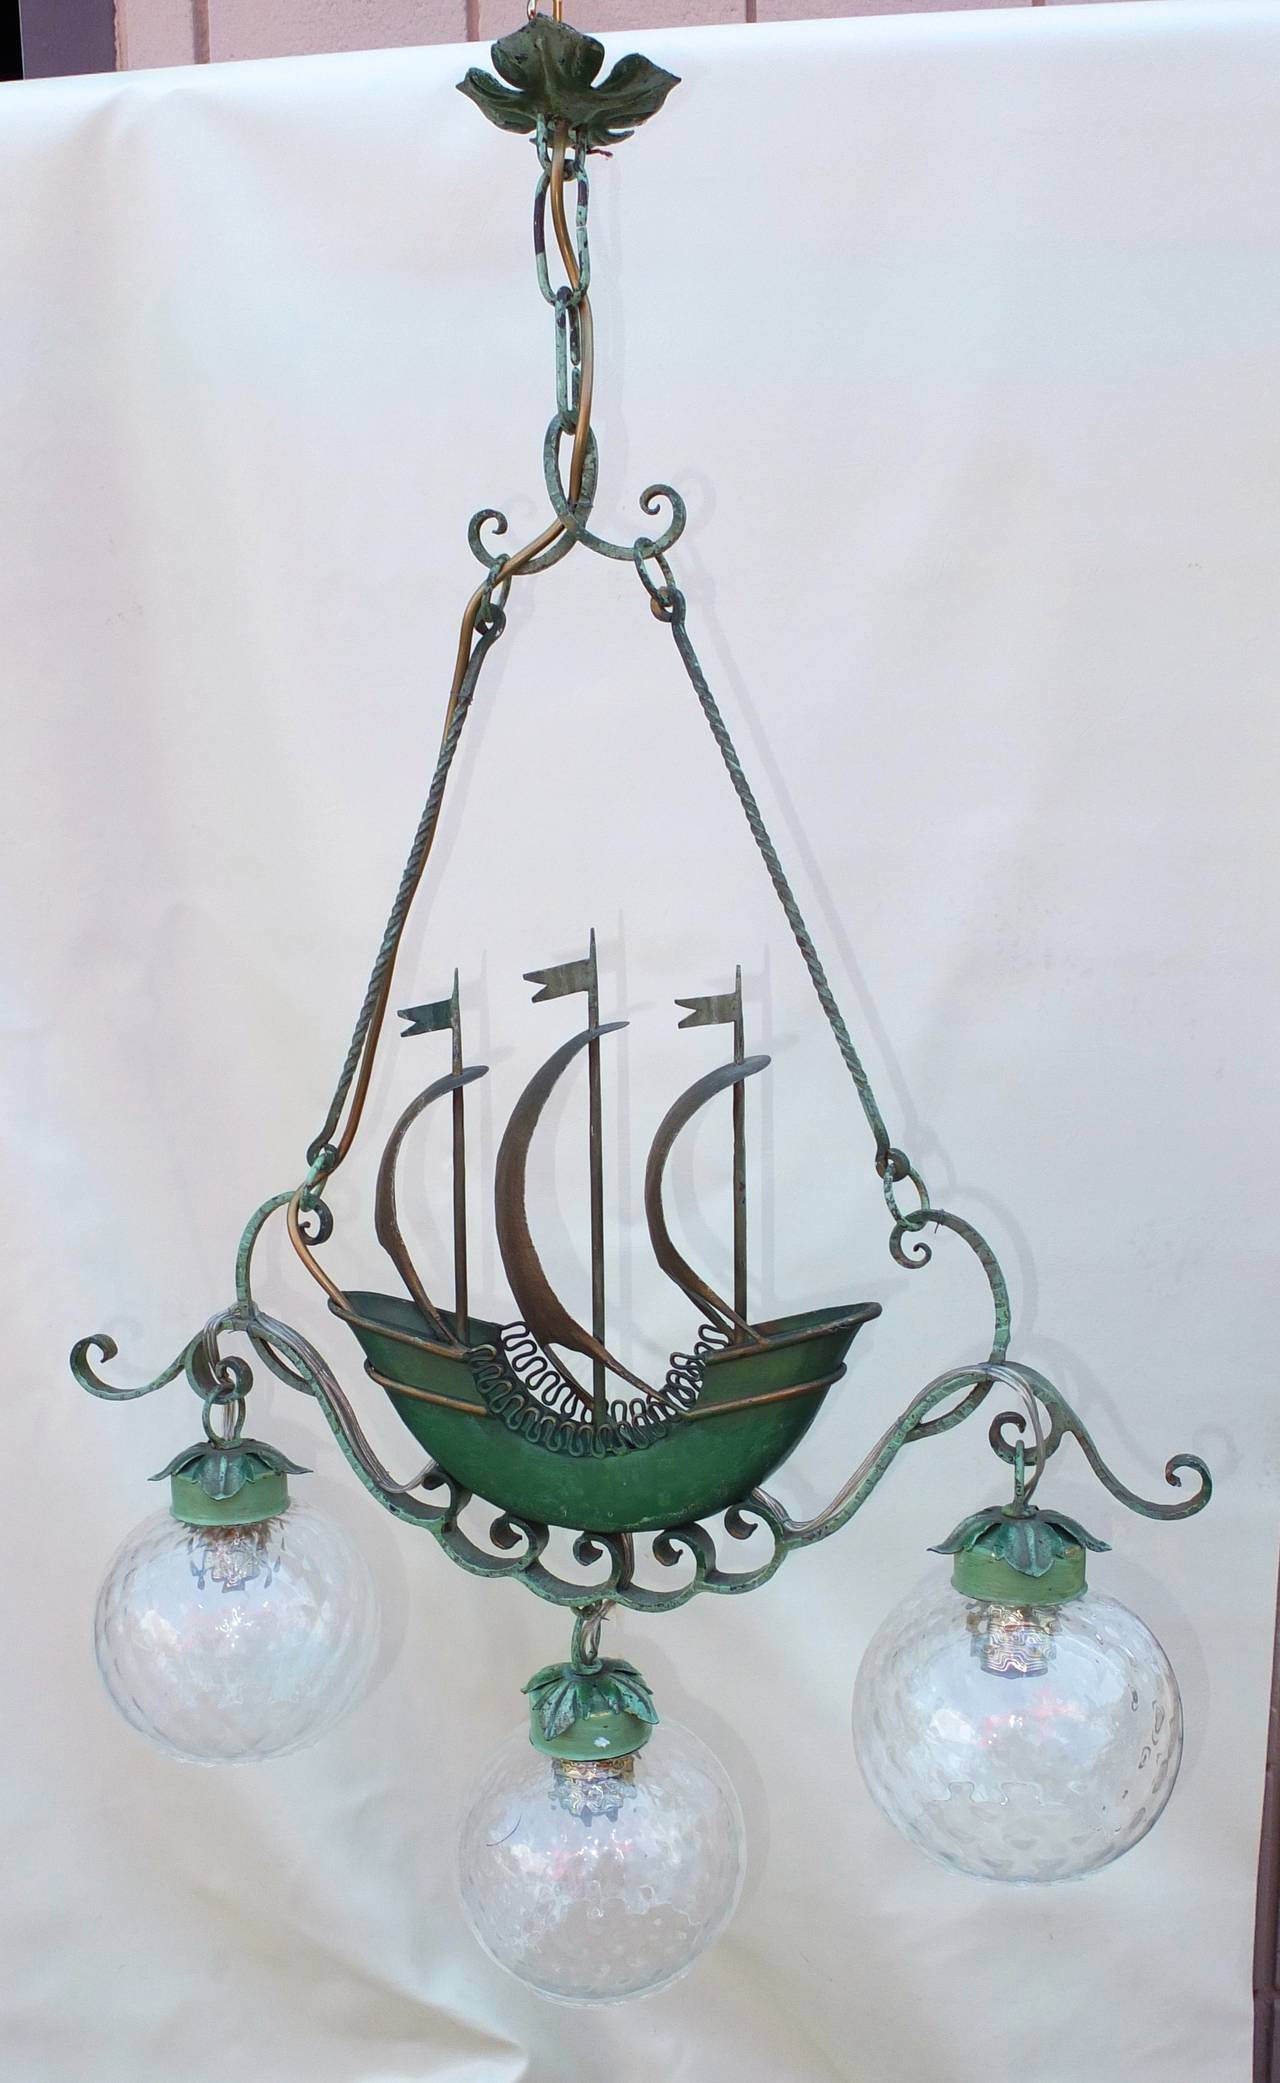 Empire Revival 1940's Italian Iron Hanging Lamp with Sailing Ship after Gio Ponti